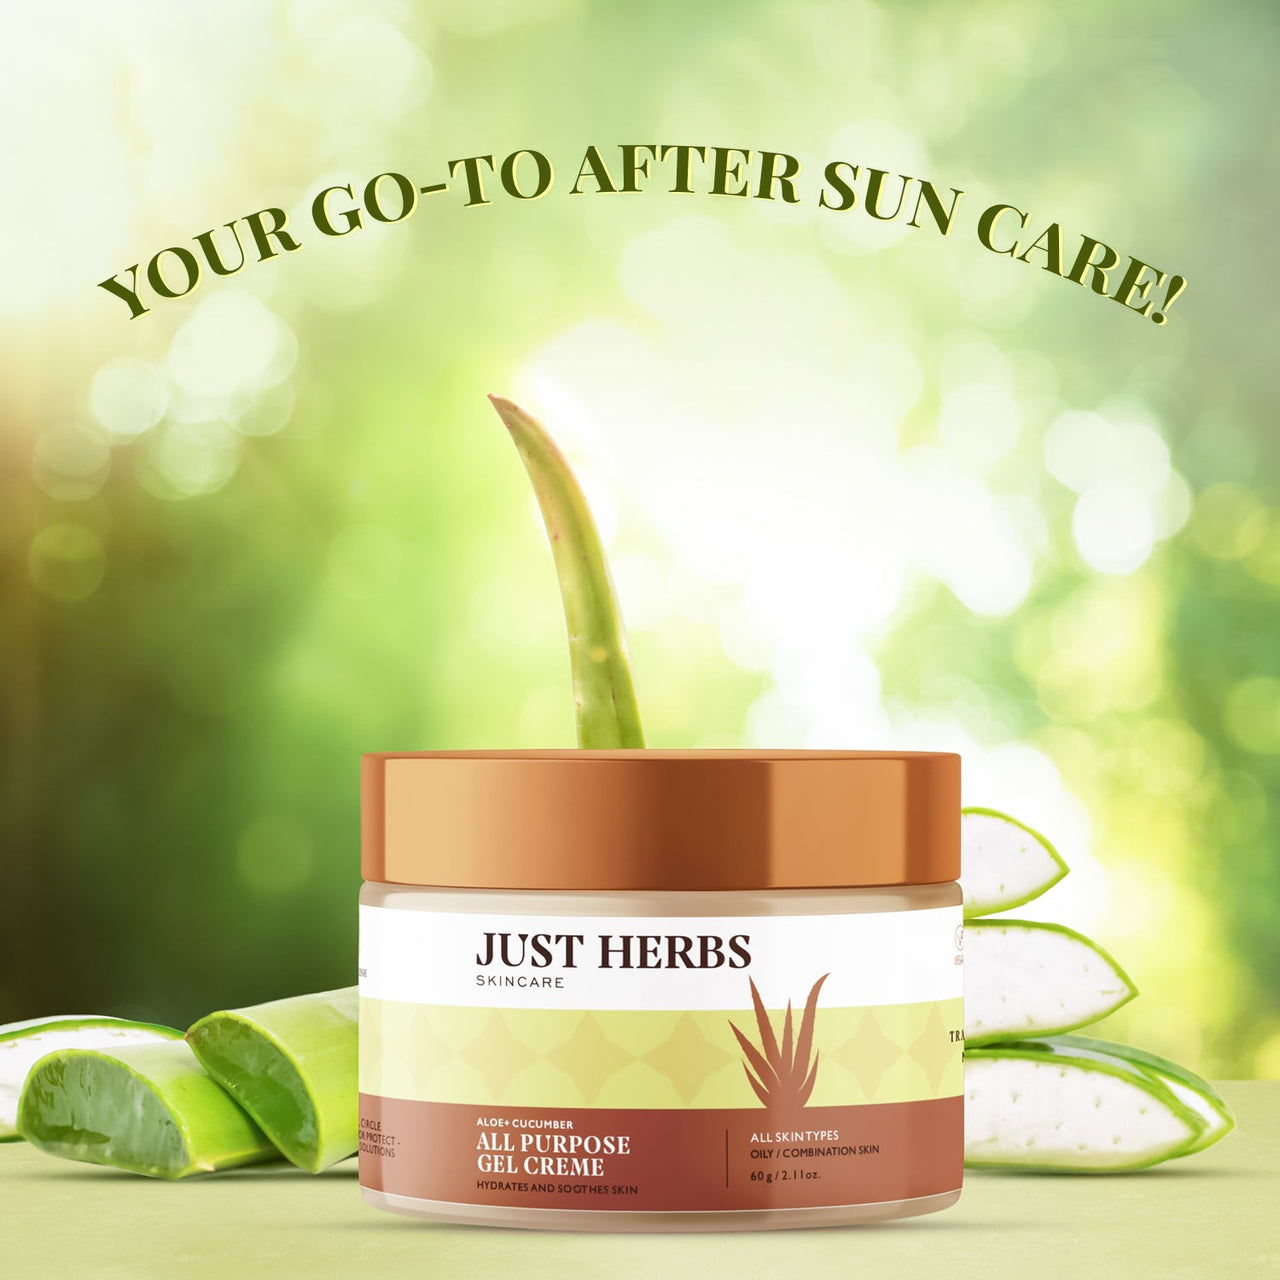 All Purpose Gel Creme with Aloe Vera and Cucumber - Just Herbs